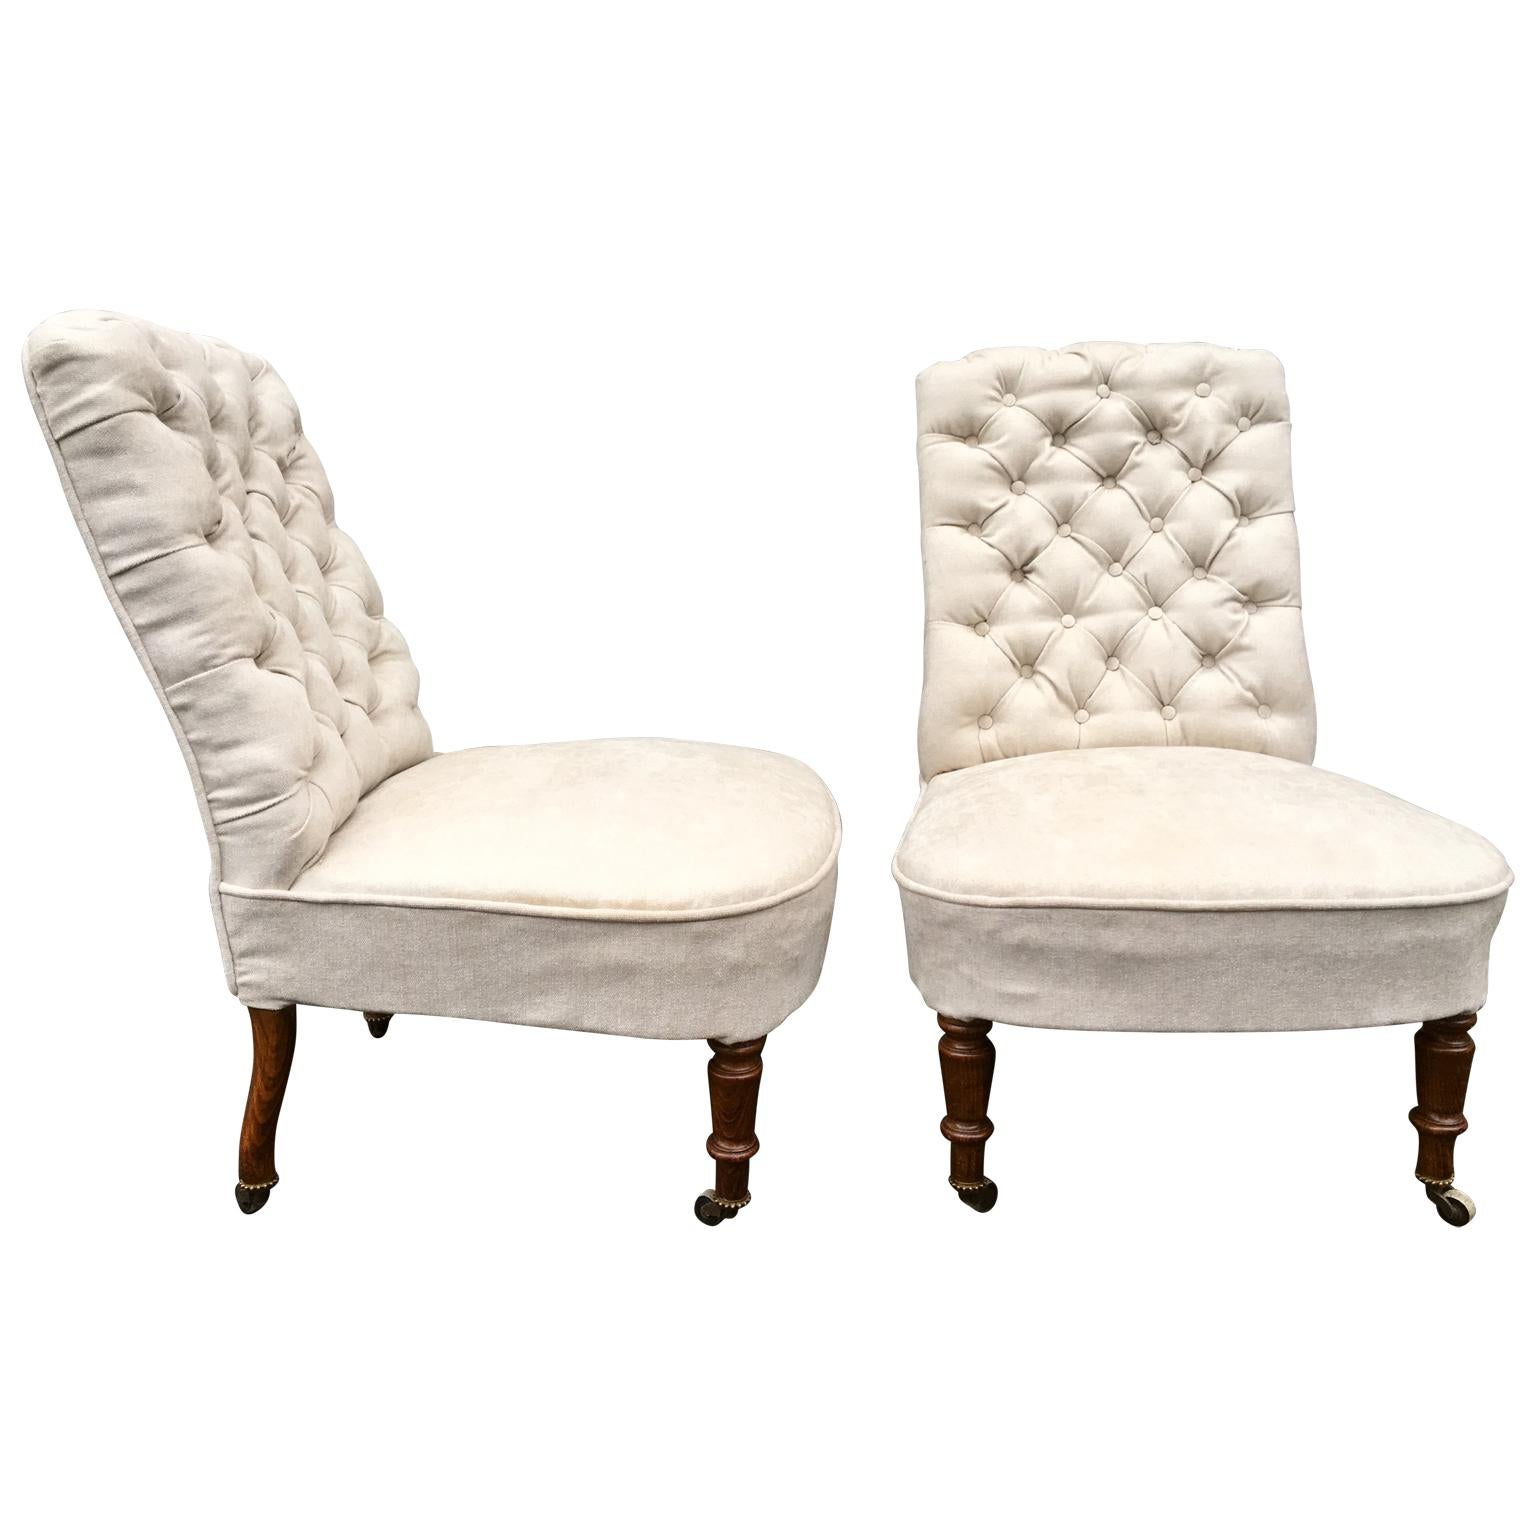 A pair of Swedish upholstered 19th Century slipper chairs from the Oskarian period (from the Swedish King Oskar the II). It’s the Swedish version of the English Victorian period. Newly re-covered.

           